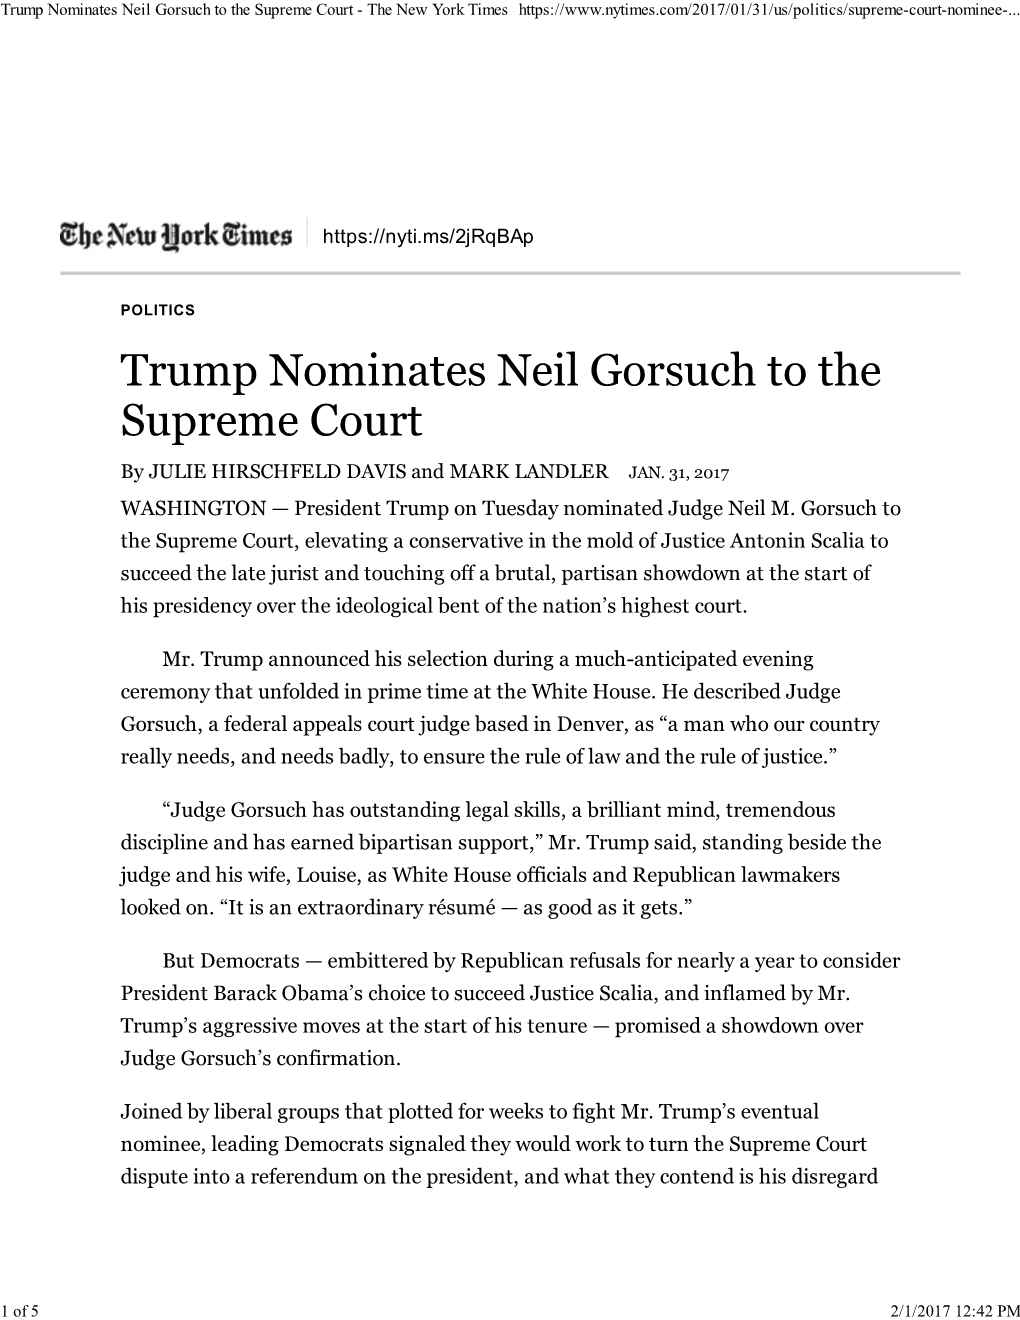 Trump Nominates Neil Gorsuch to the Supreme Court - the New York Times